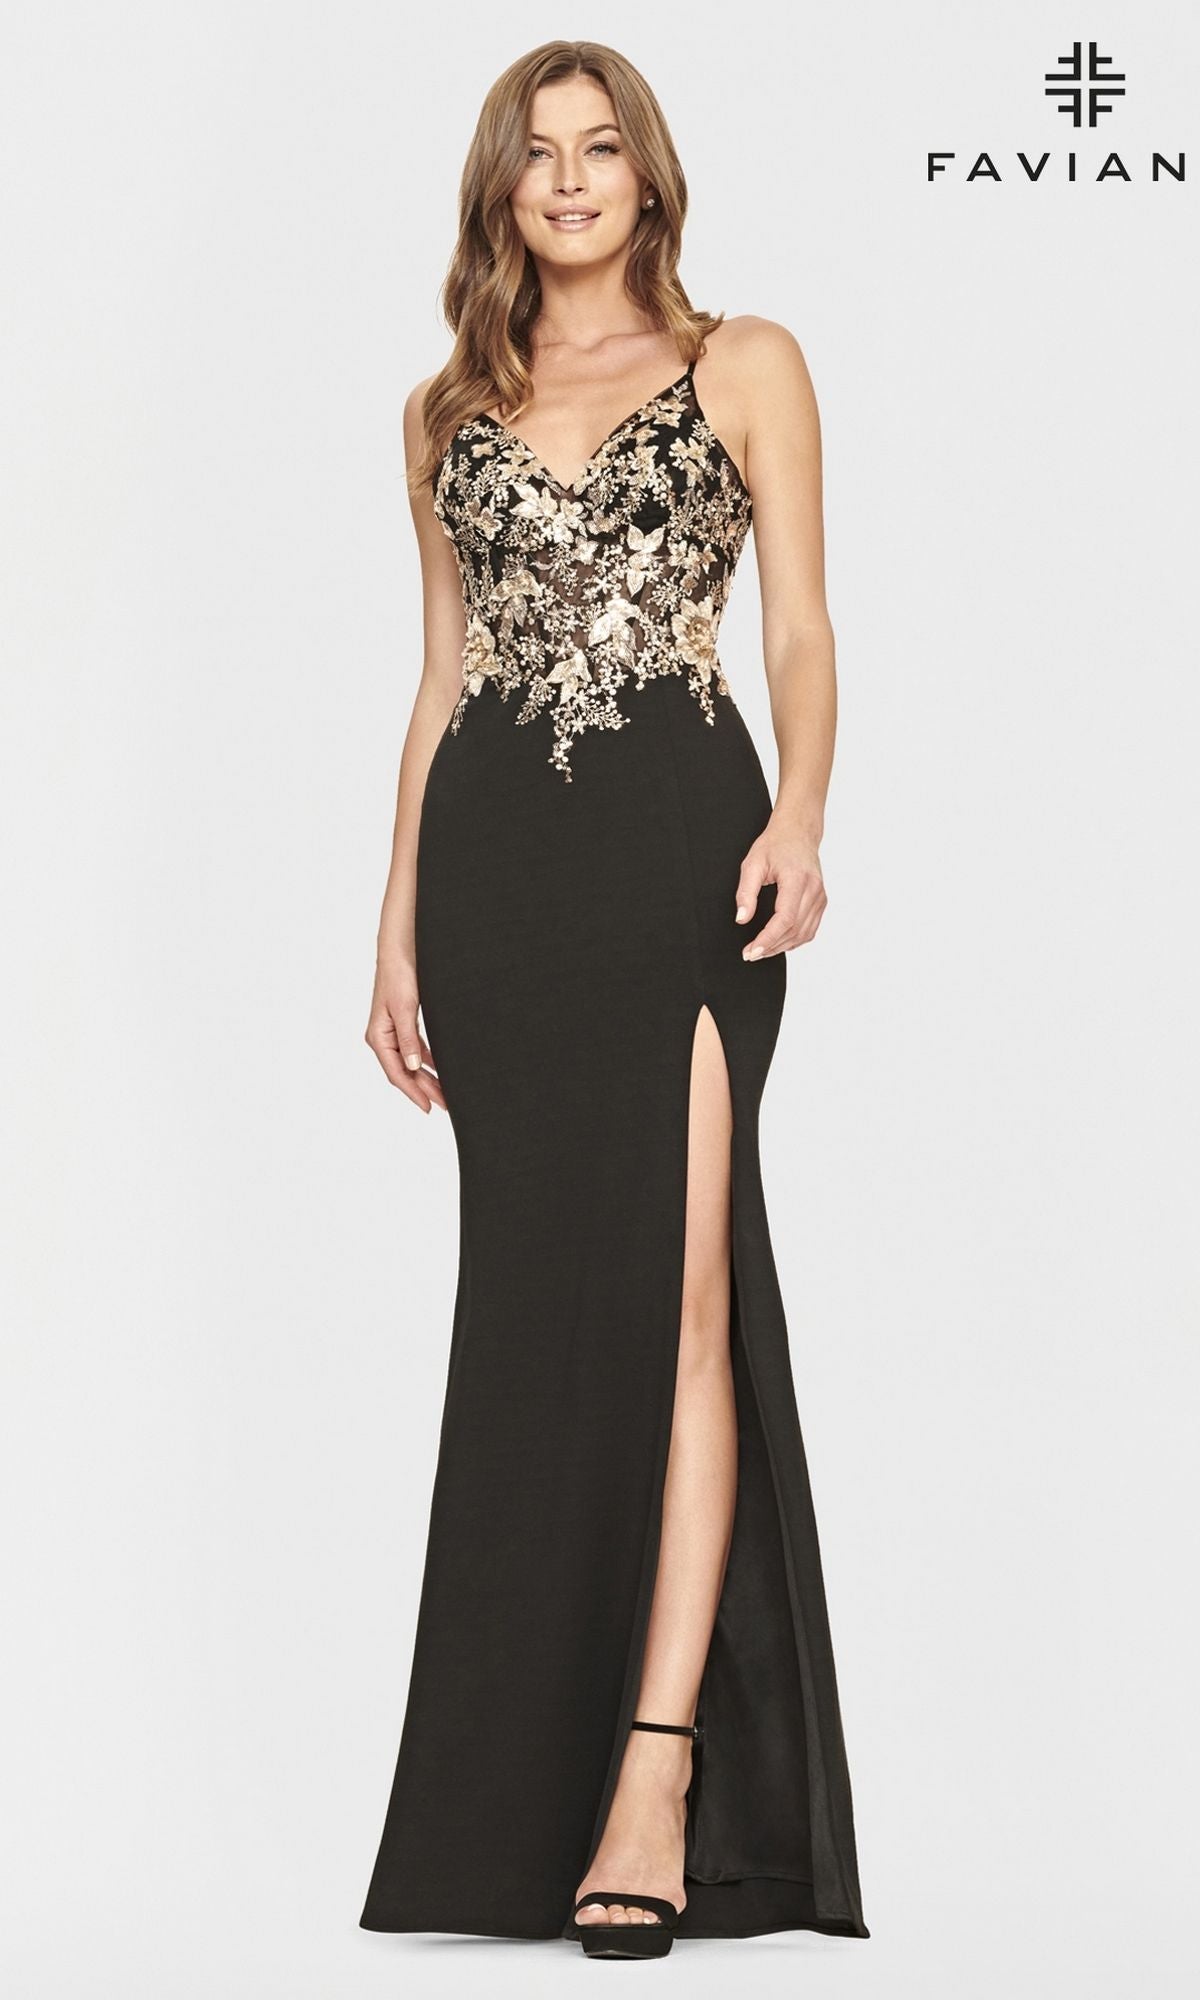 Black With Gold Sparkly Formal Party Dress With Illusion Neck Sleeves -  $124.9776 #AM79003 - SheProm.com